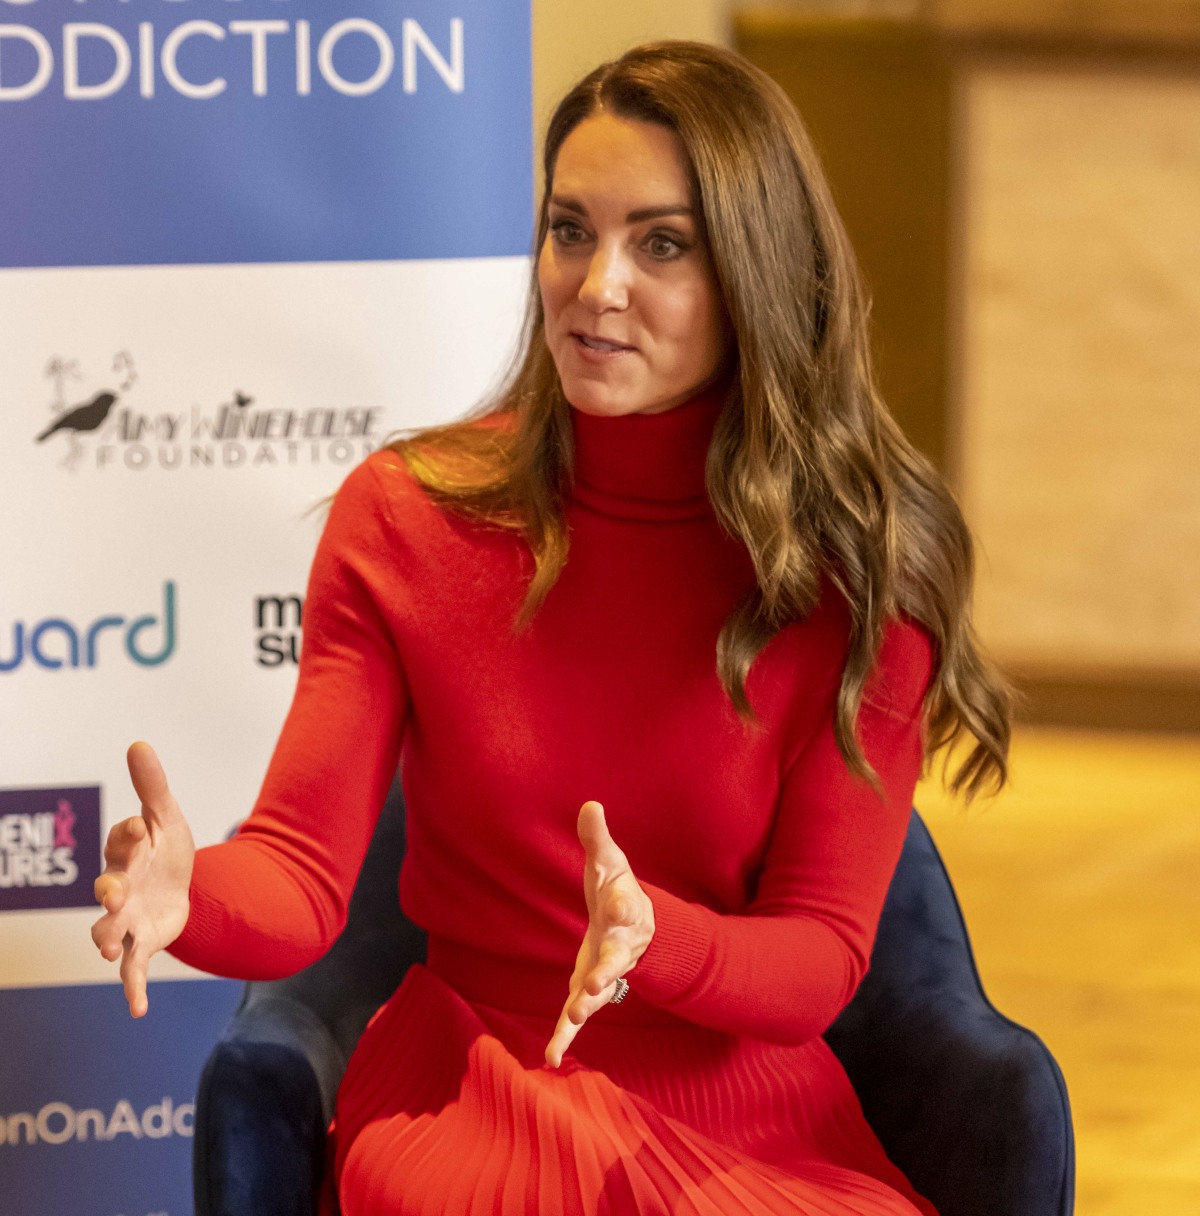 The Duchess of Cambridge making a keynote speech to launch "Taking Action on Addiction" campaign.